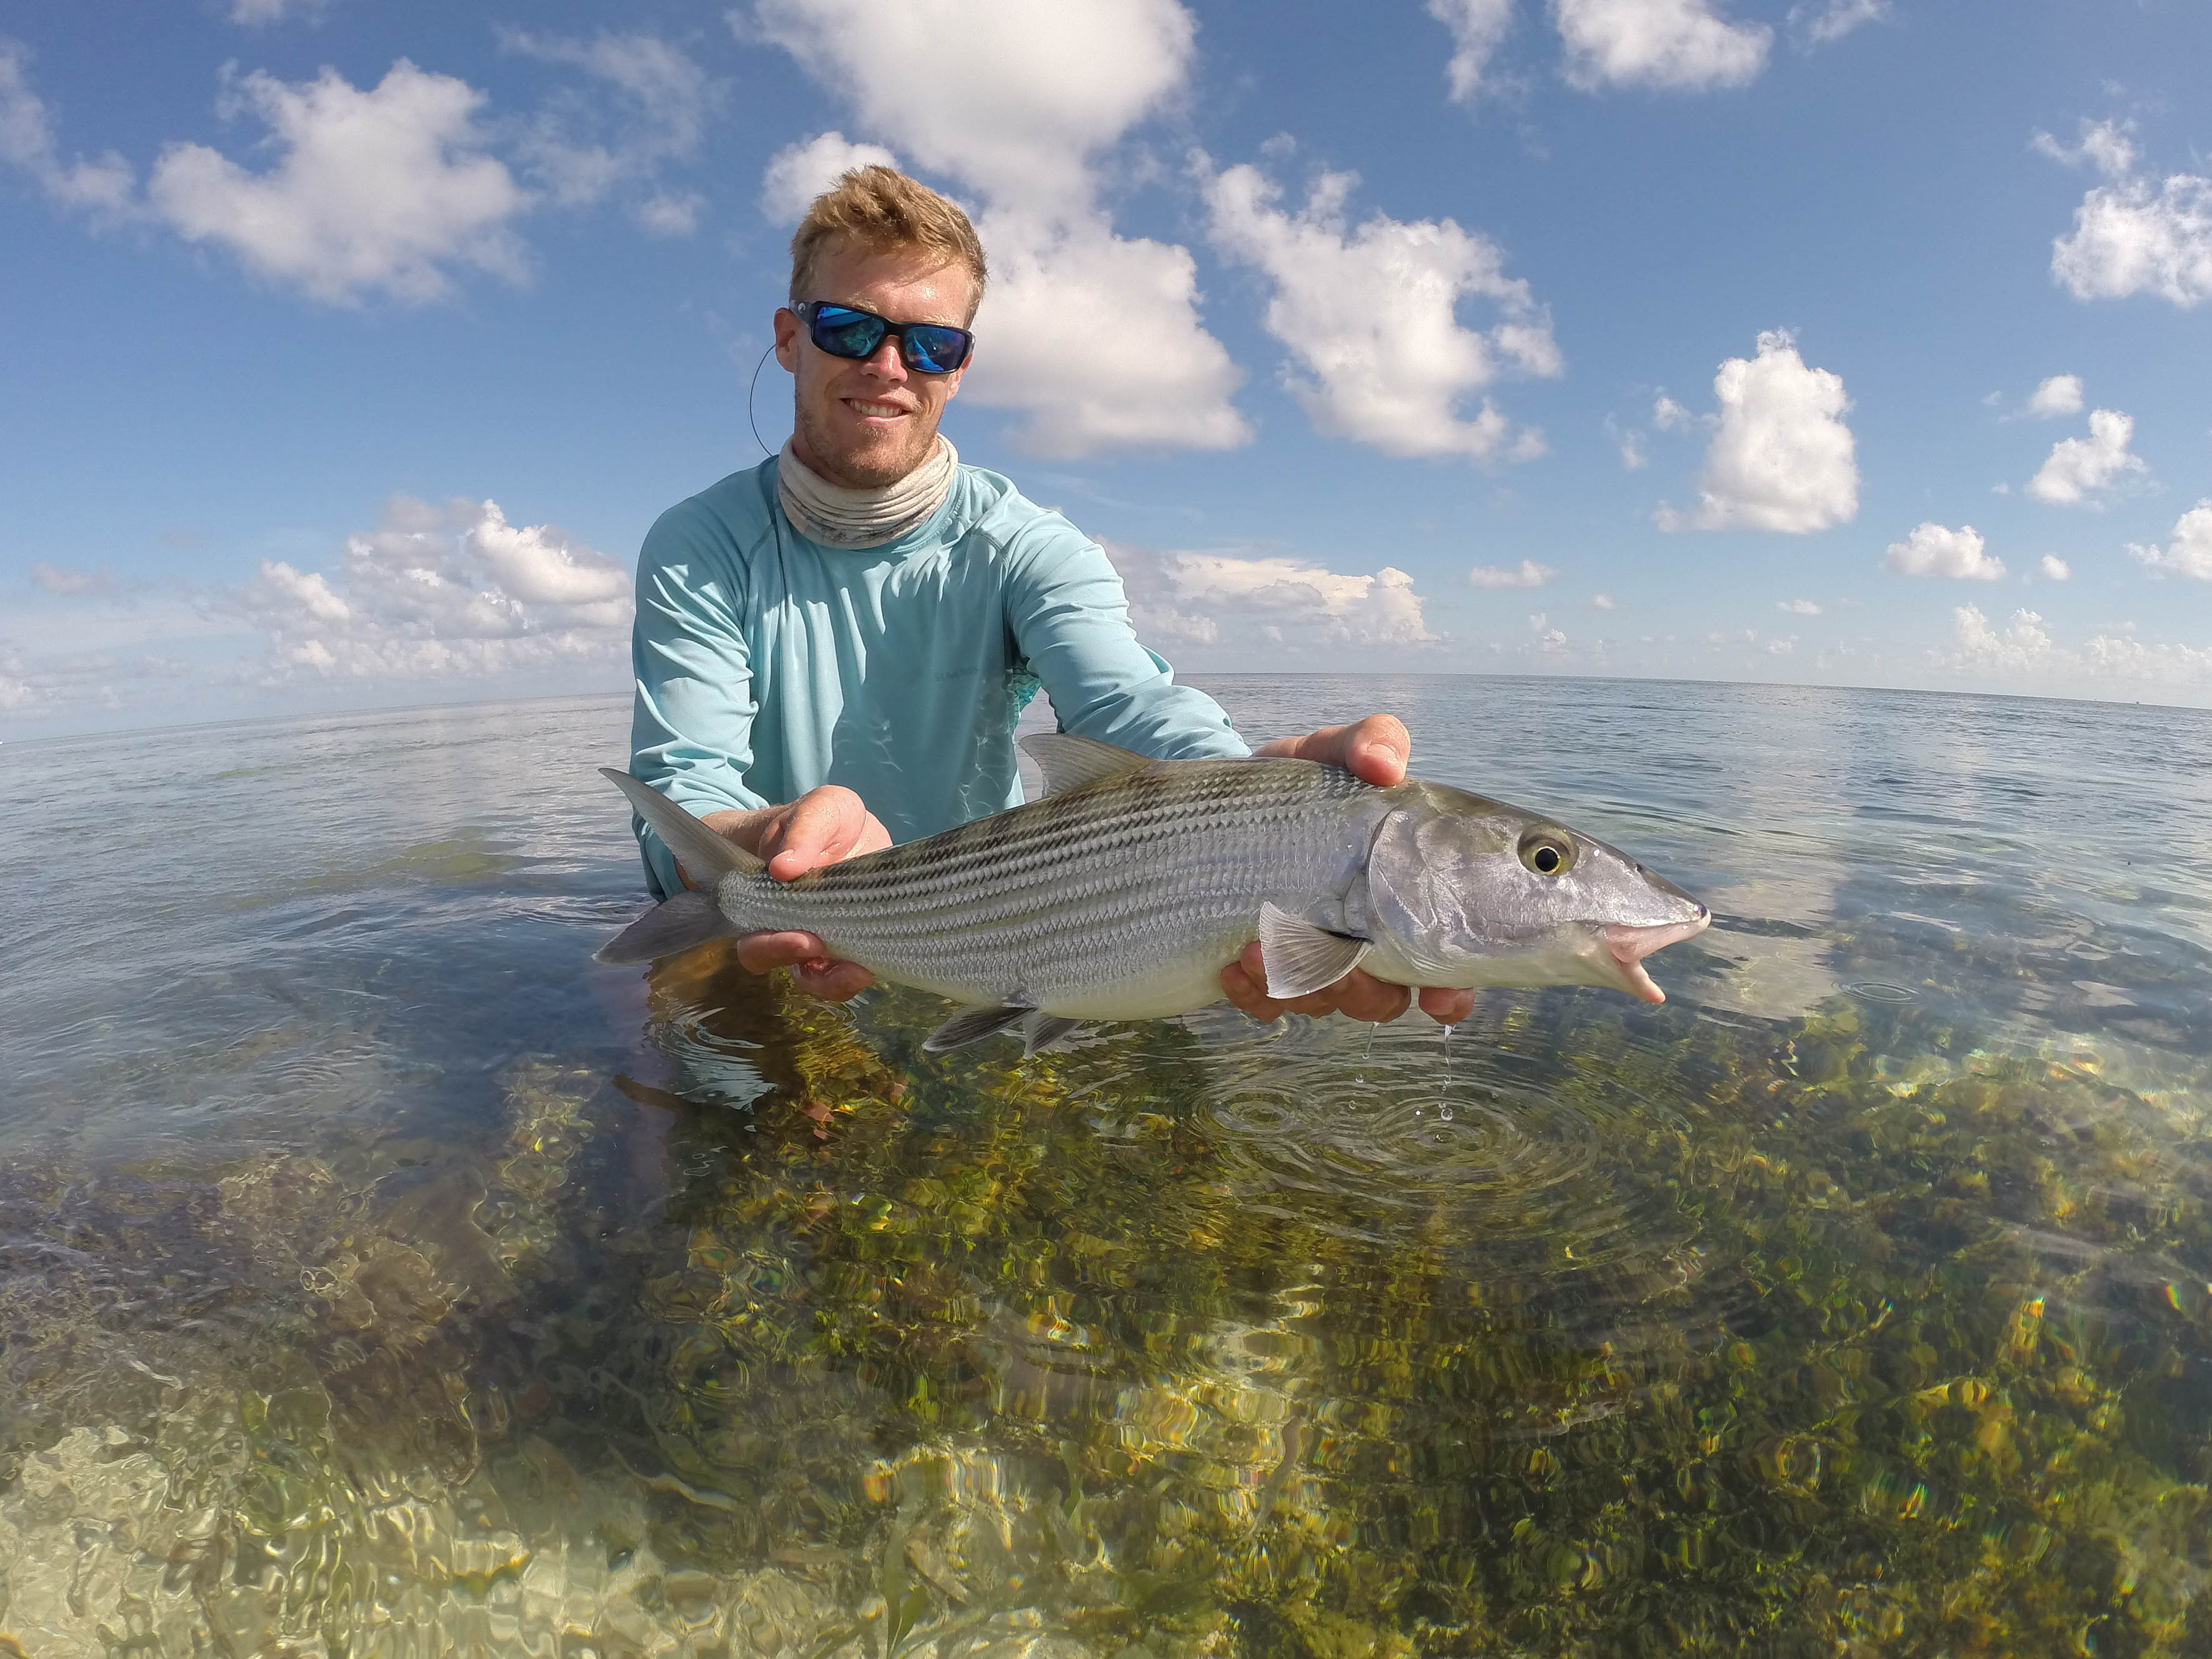 angler Shawn Hamilton holds his first bonefish. He caught is while sight fishing on the flats in the lower keys